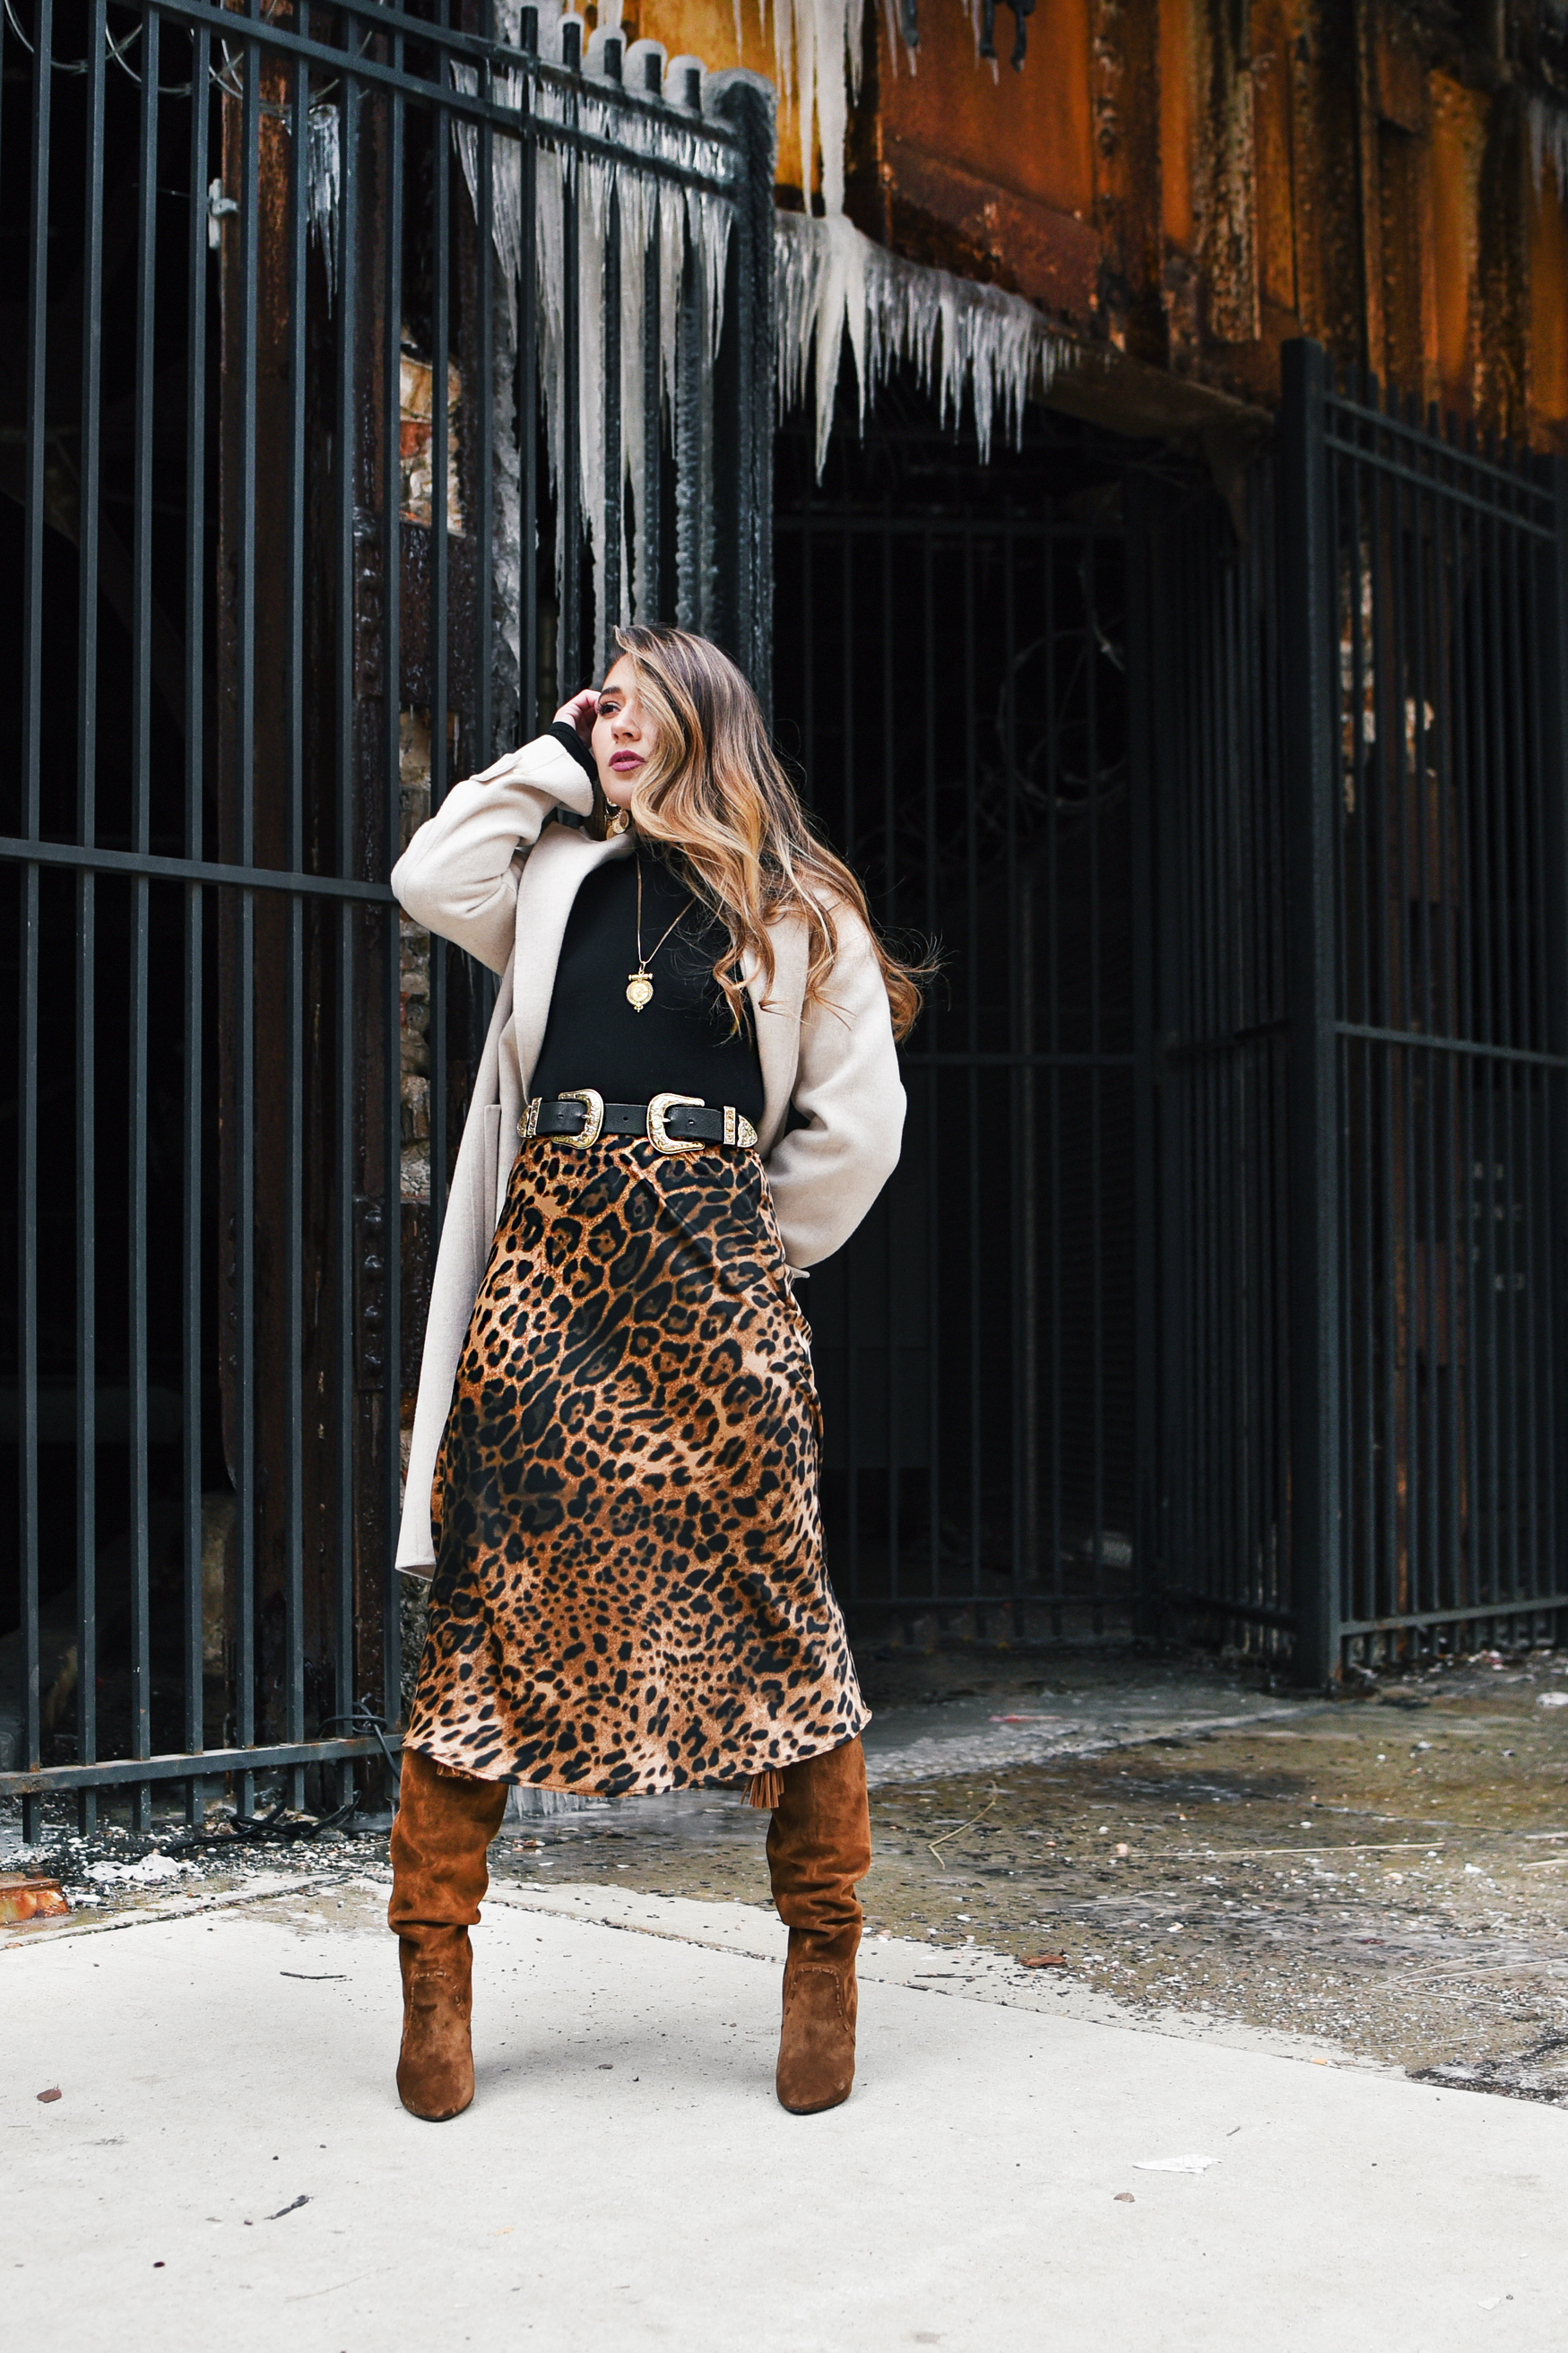 cheetah-skirt-ysl-fringe-boot-long-trench-coat-winter-spring-layers-style-outfit